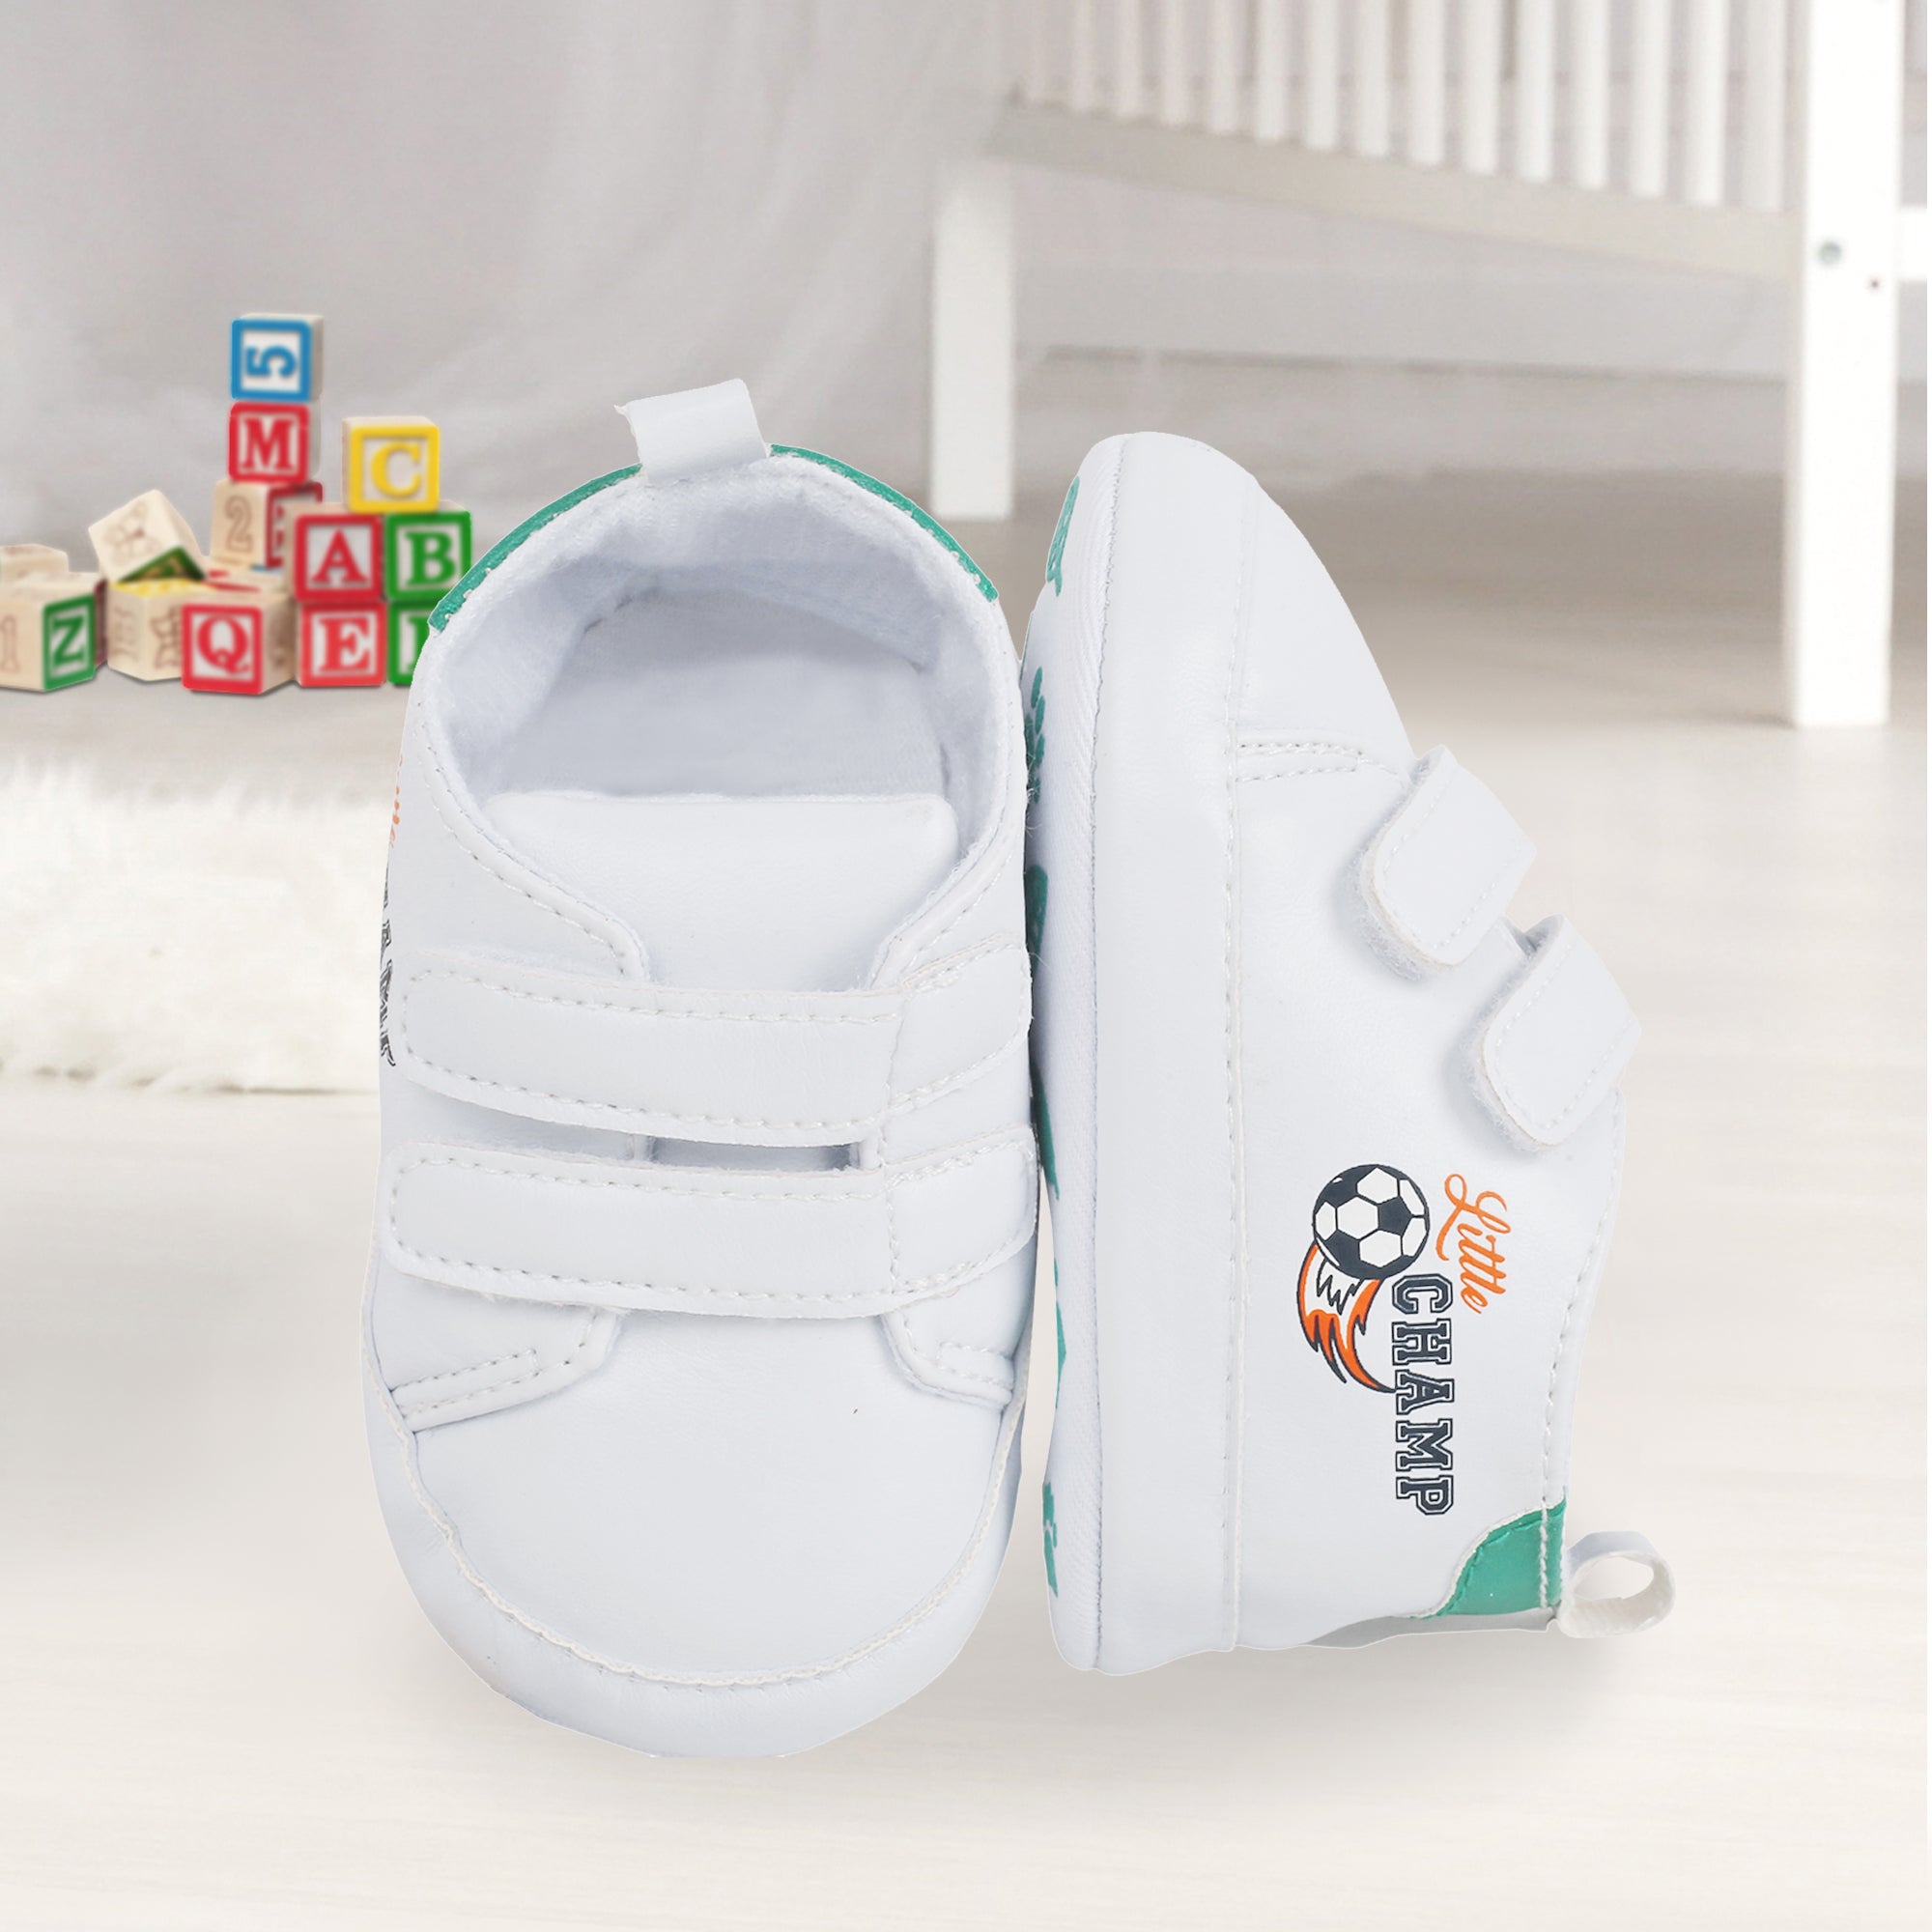 Baby Moo Little Champ White Velcro Sneakers